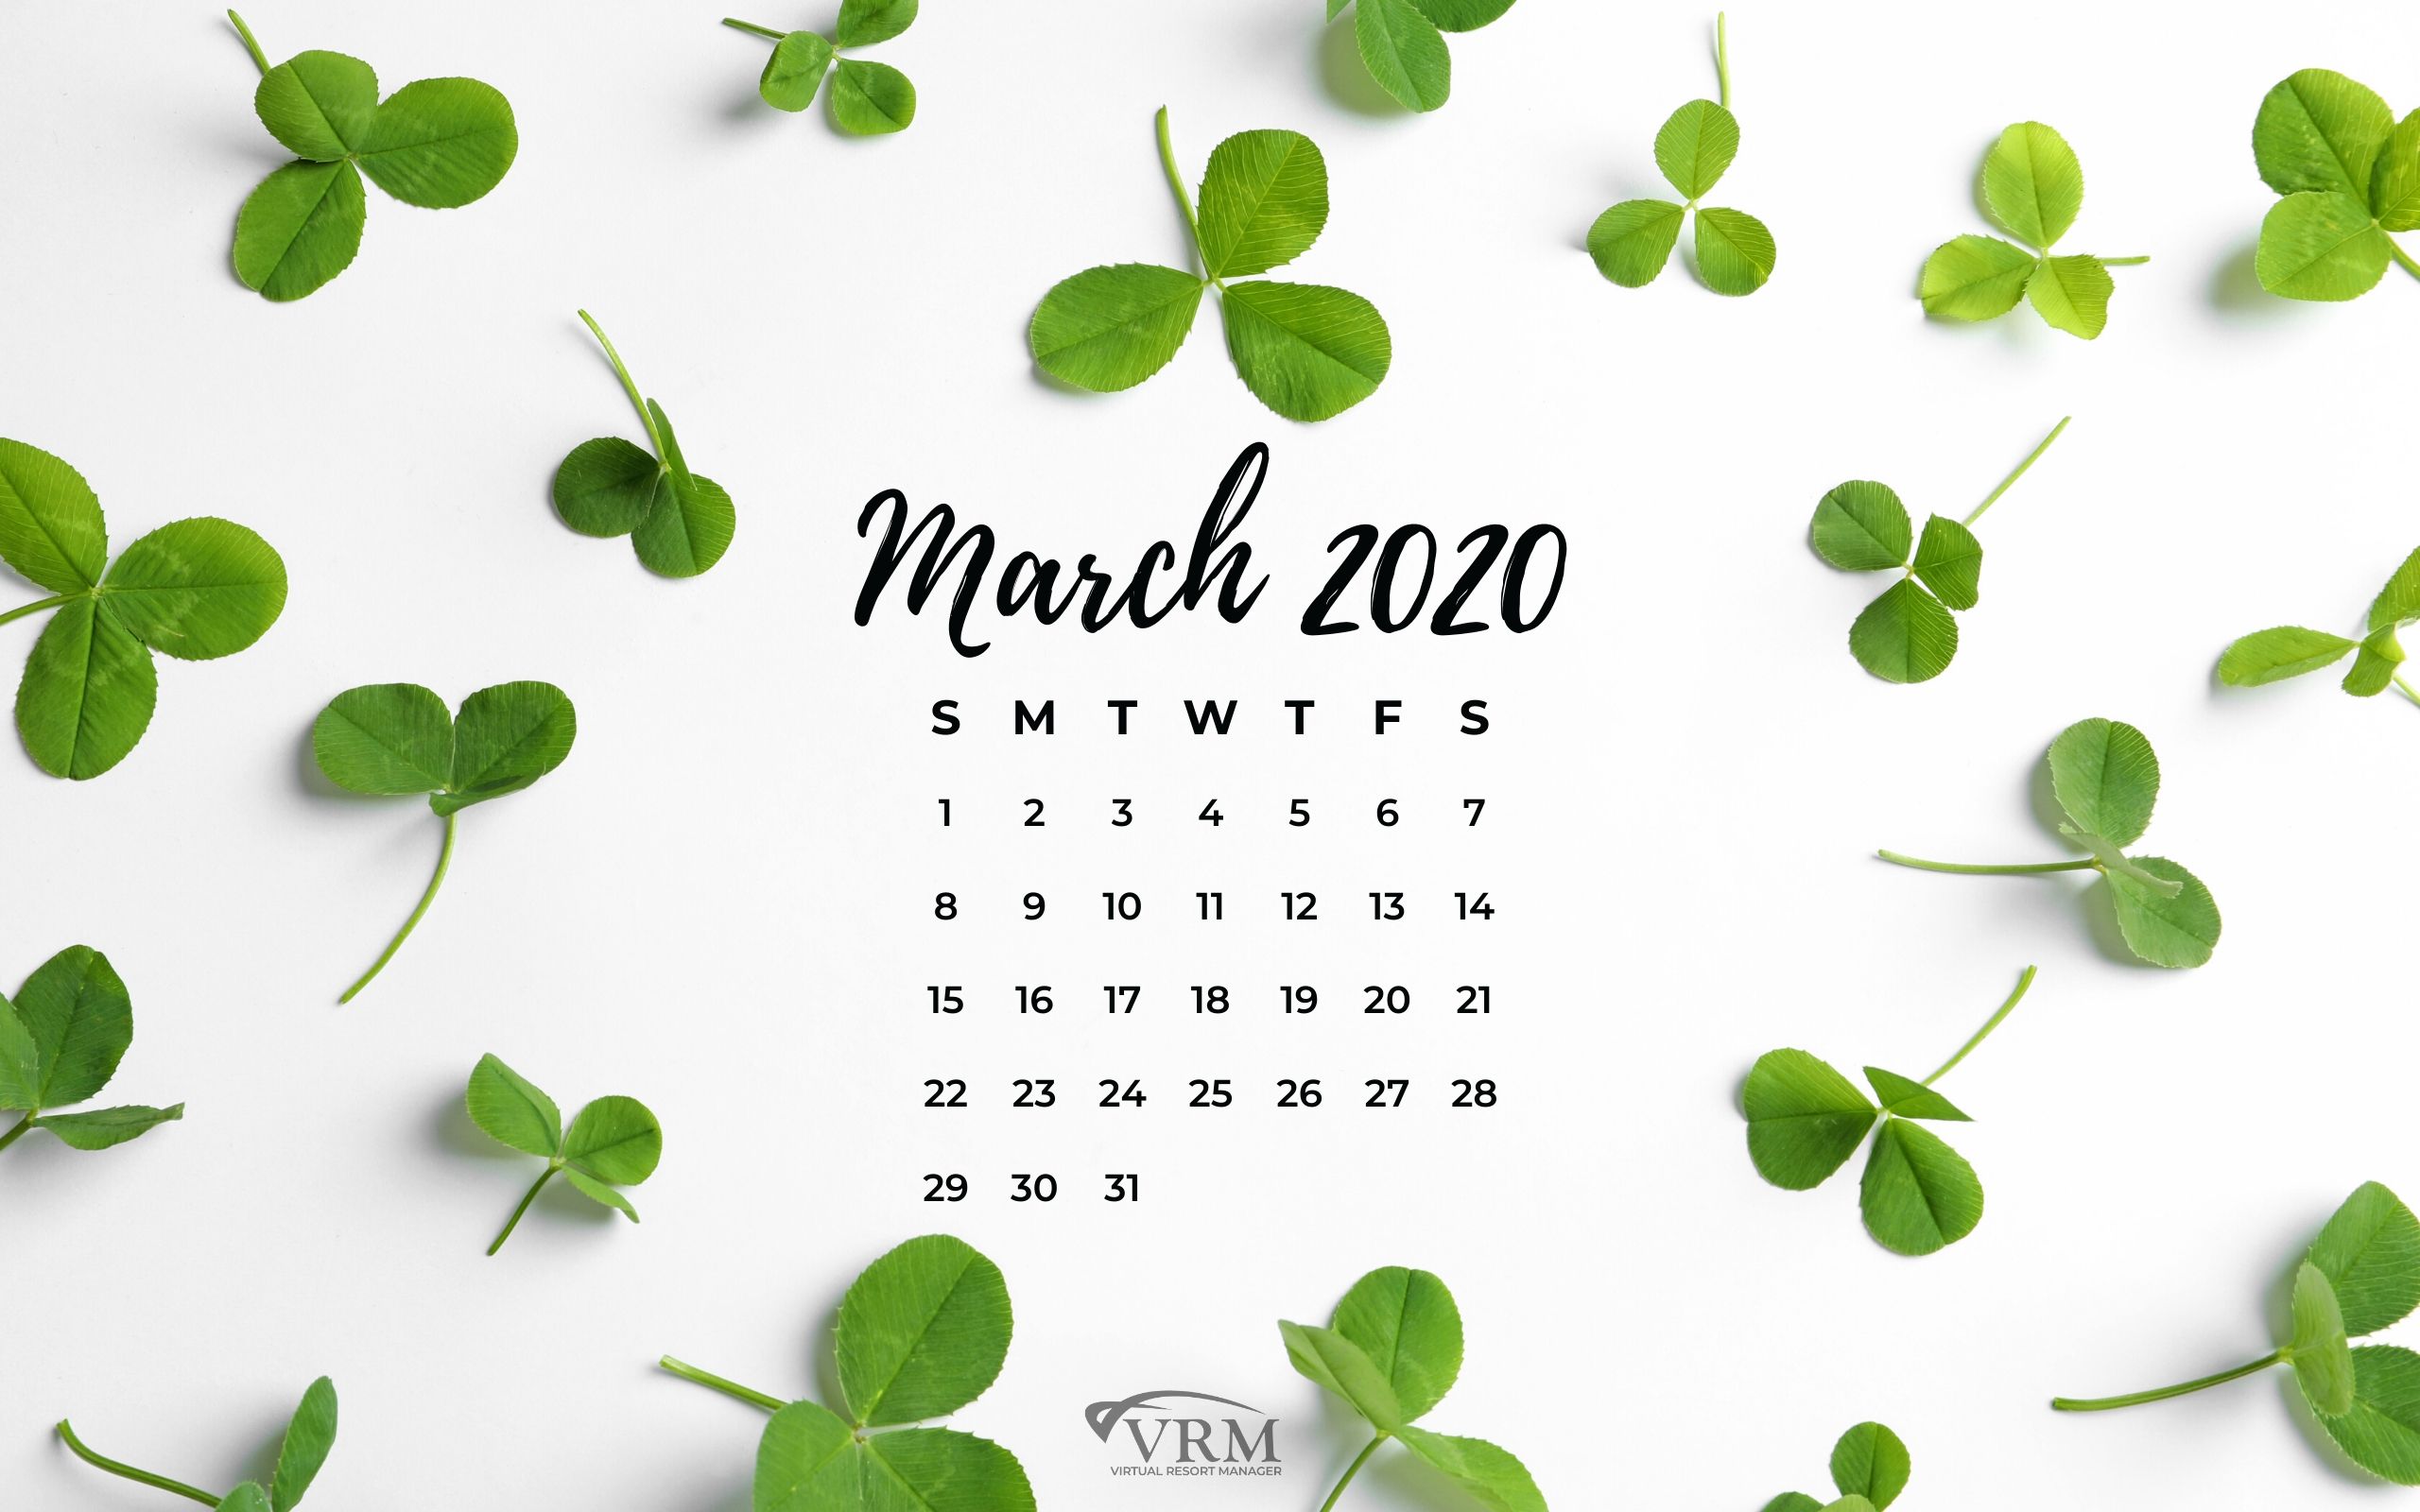 March 2022 Calendar Wallpaper Images  Free Photos PNG Stickers Wallpapers   Backgrounds  rawpixel